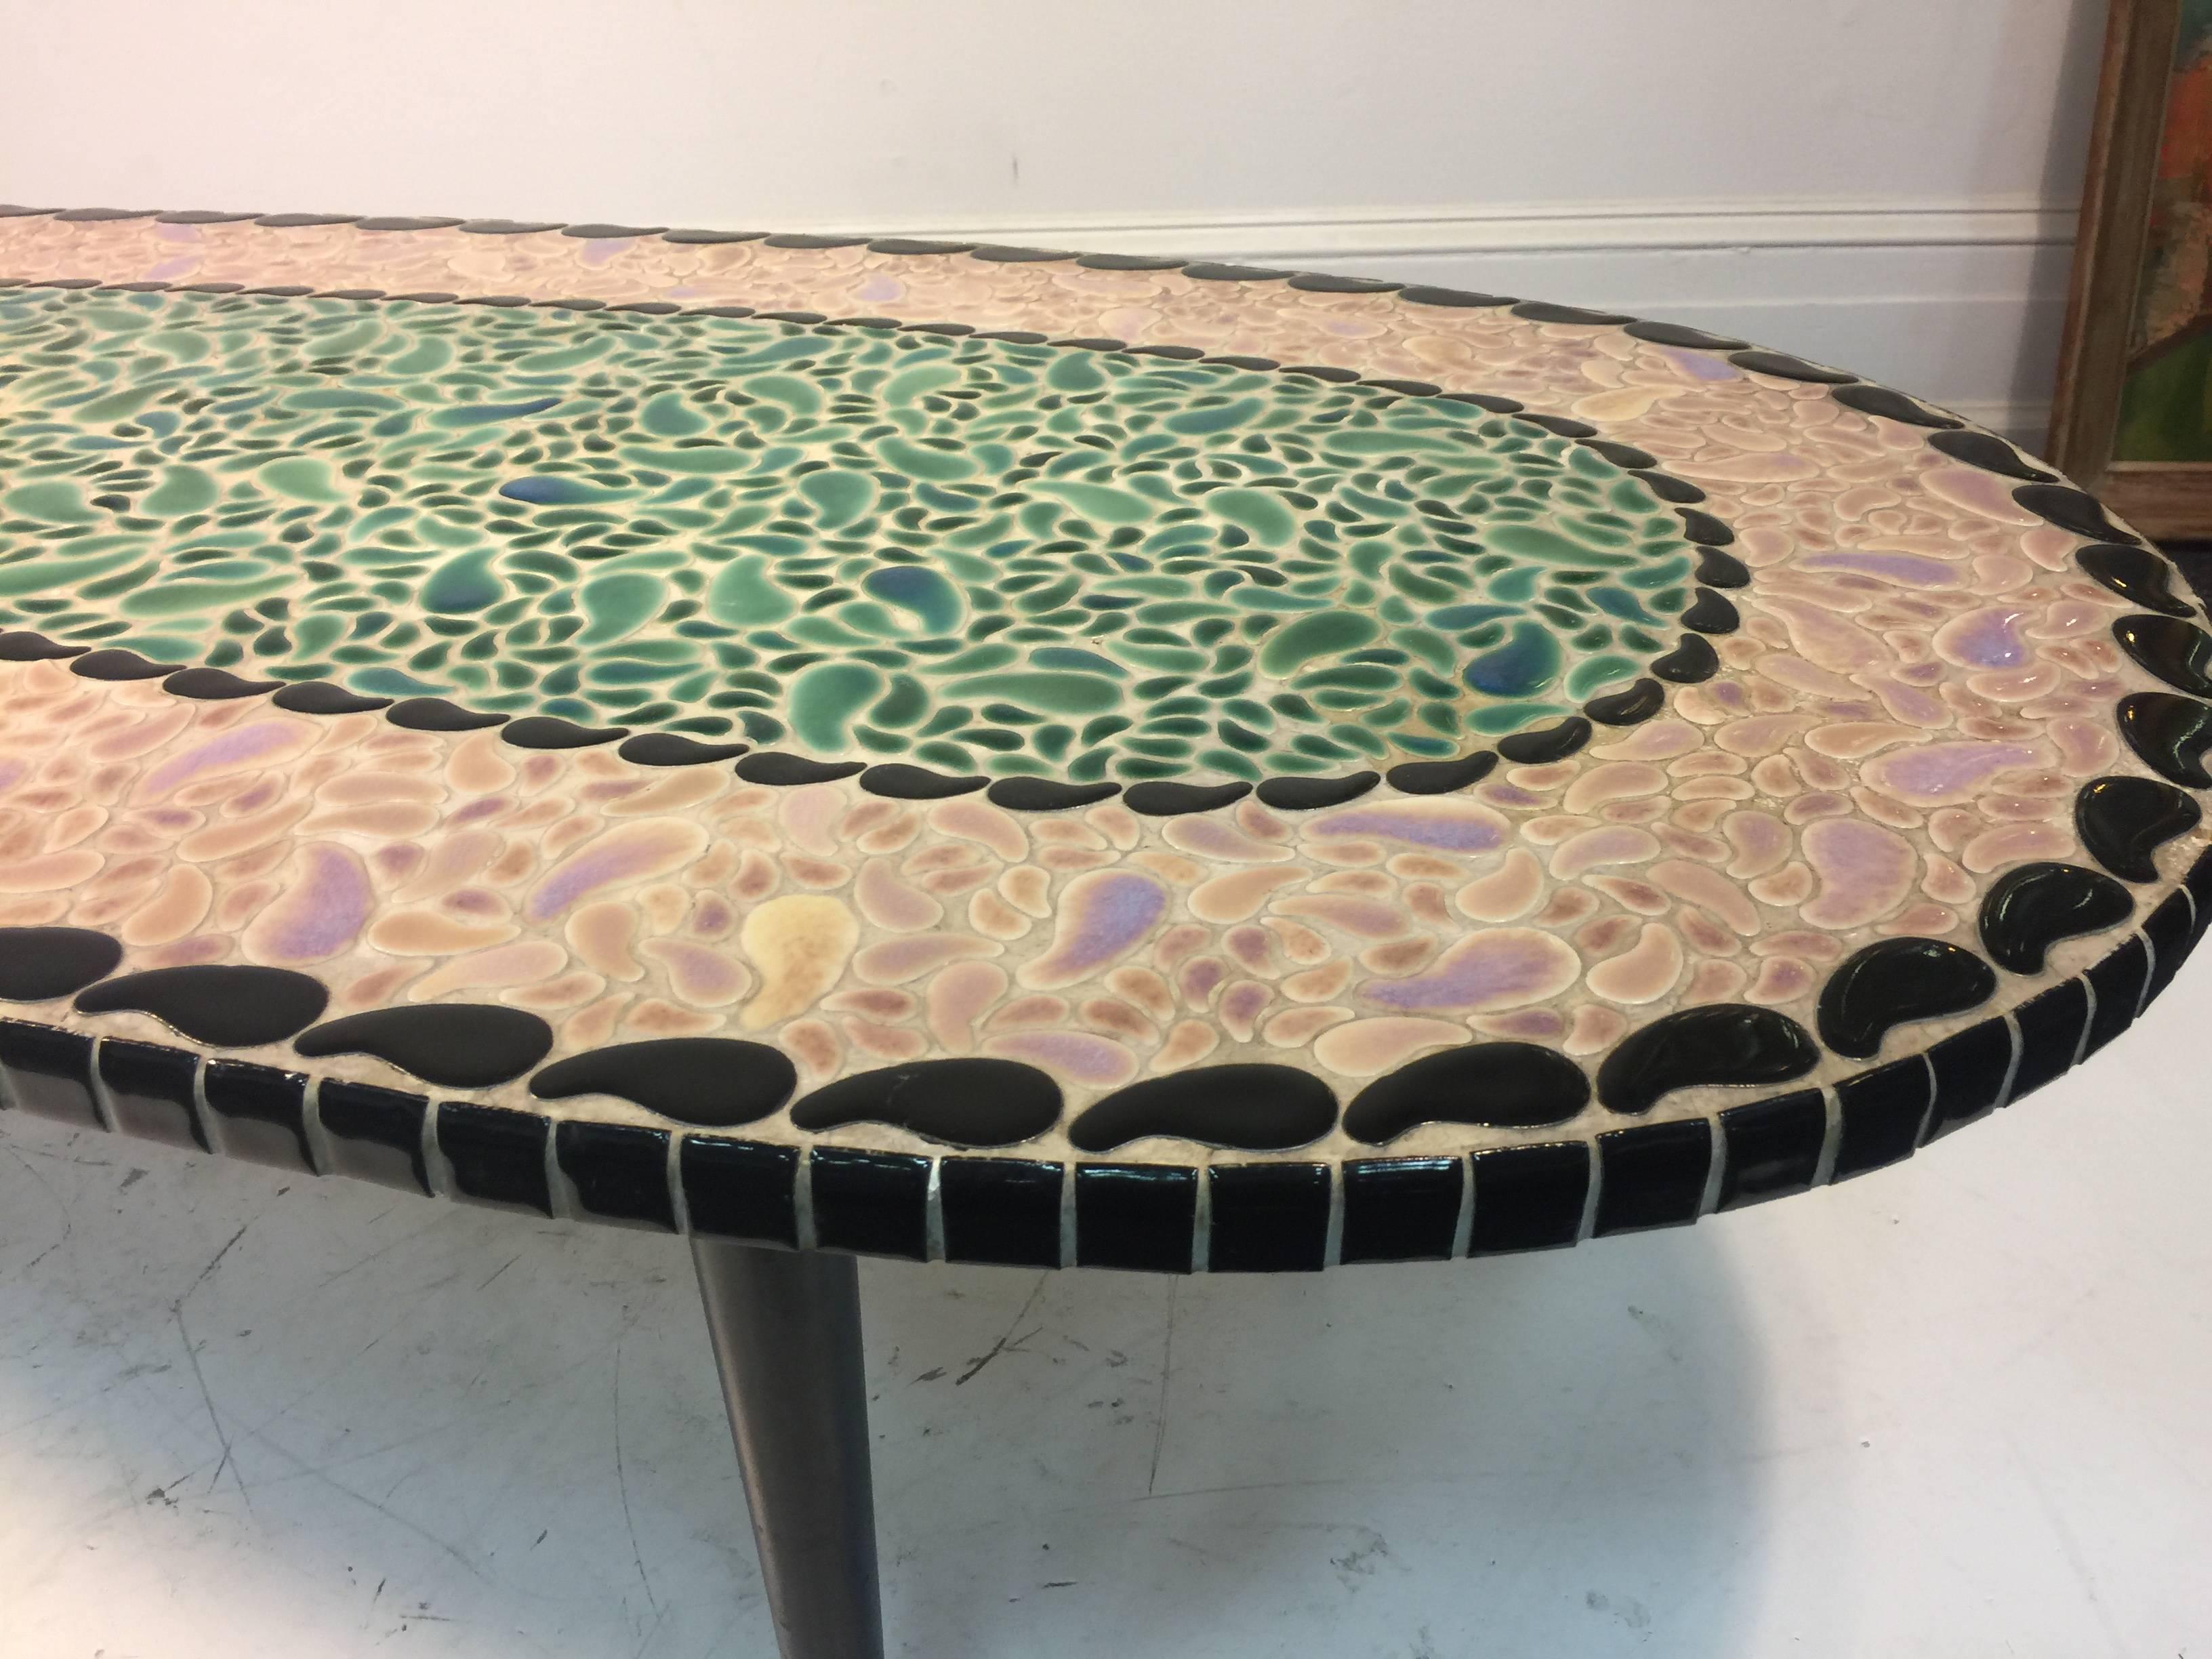 Magnificent Mosaic Tile Top Coffee Table in an Unusual Kidney Shape For Sale 1